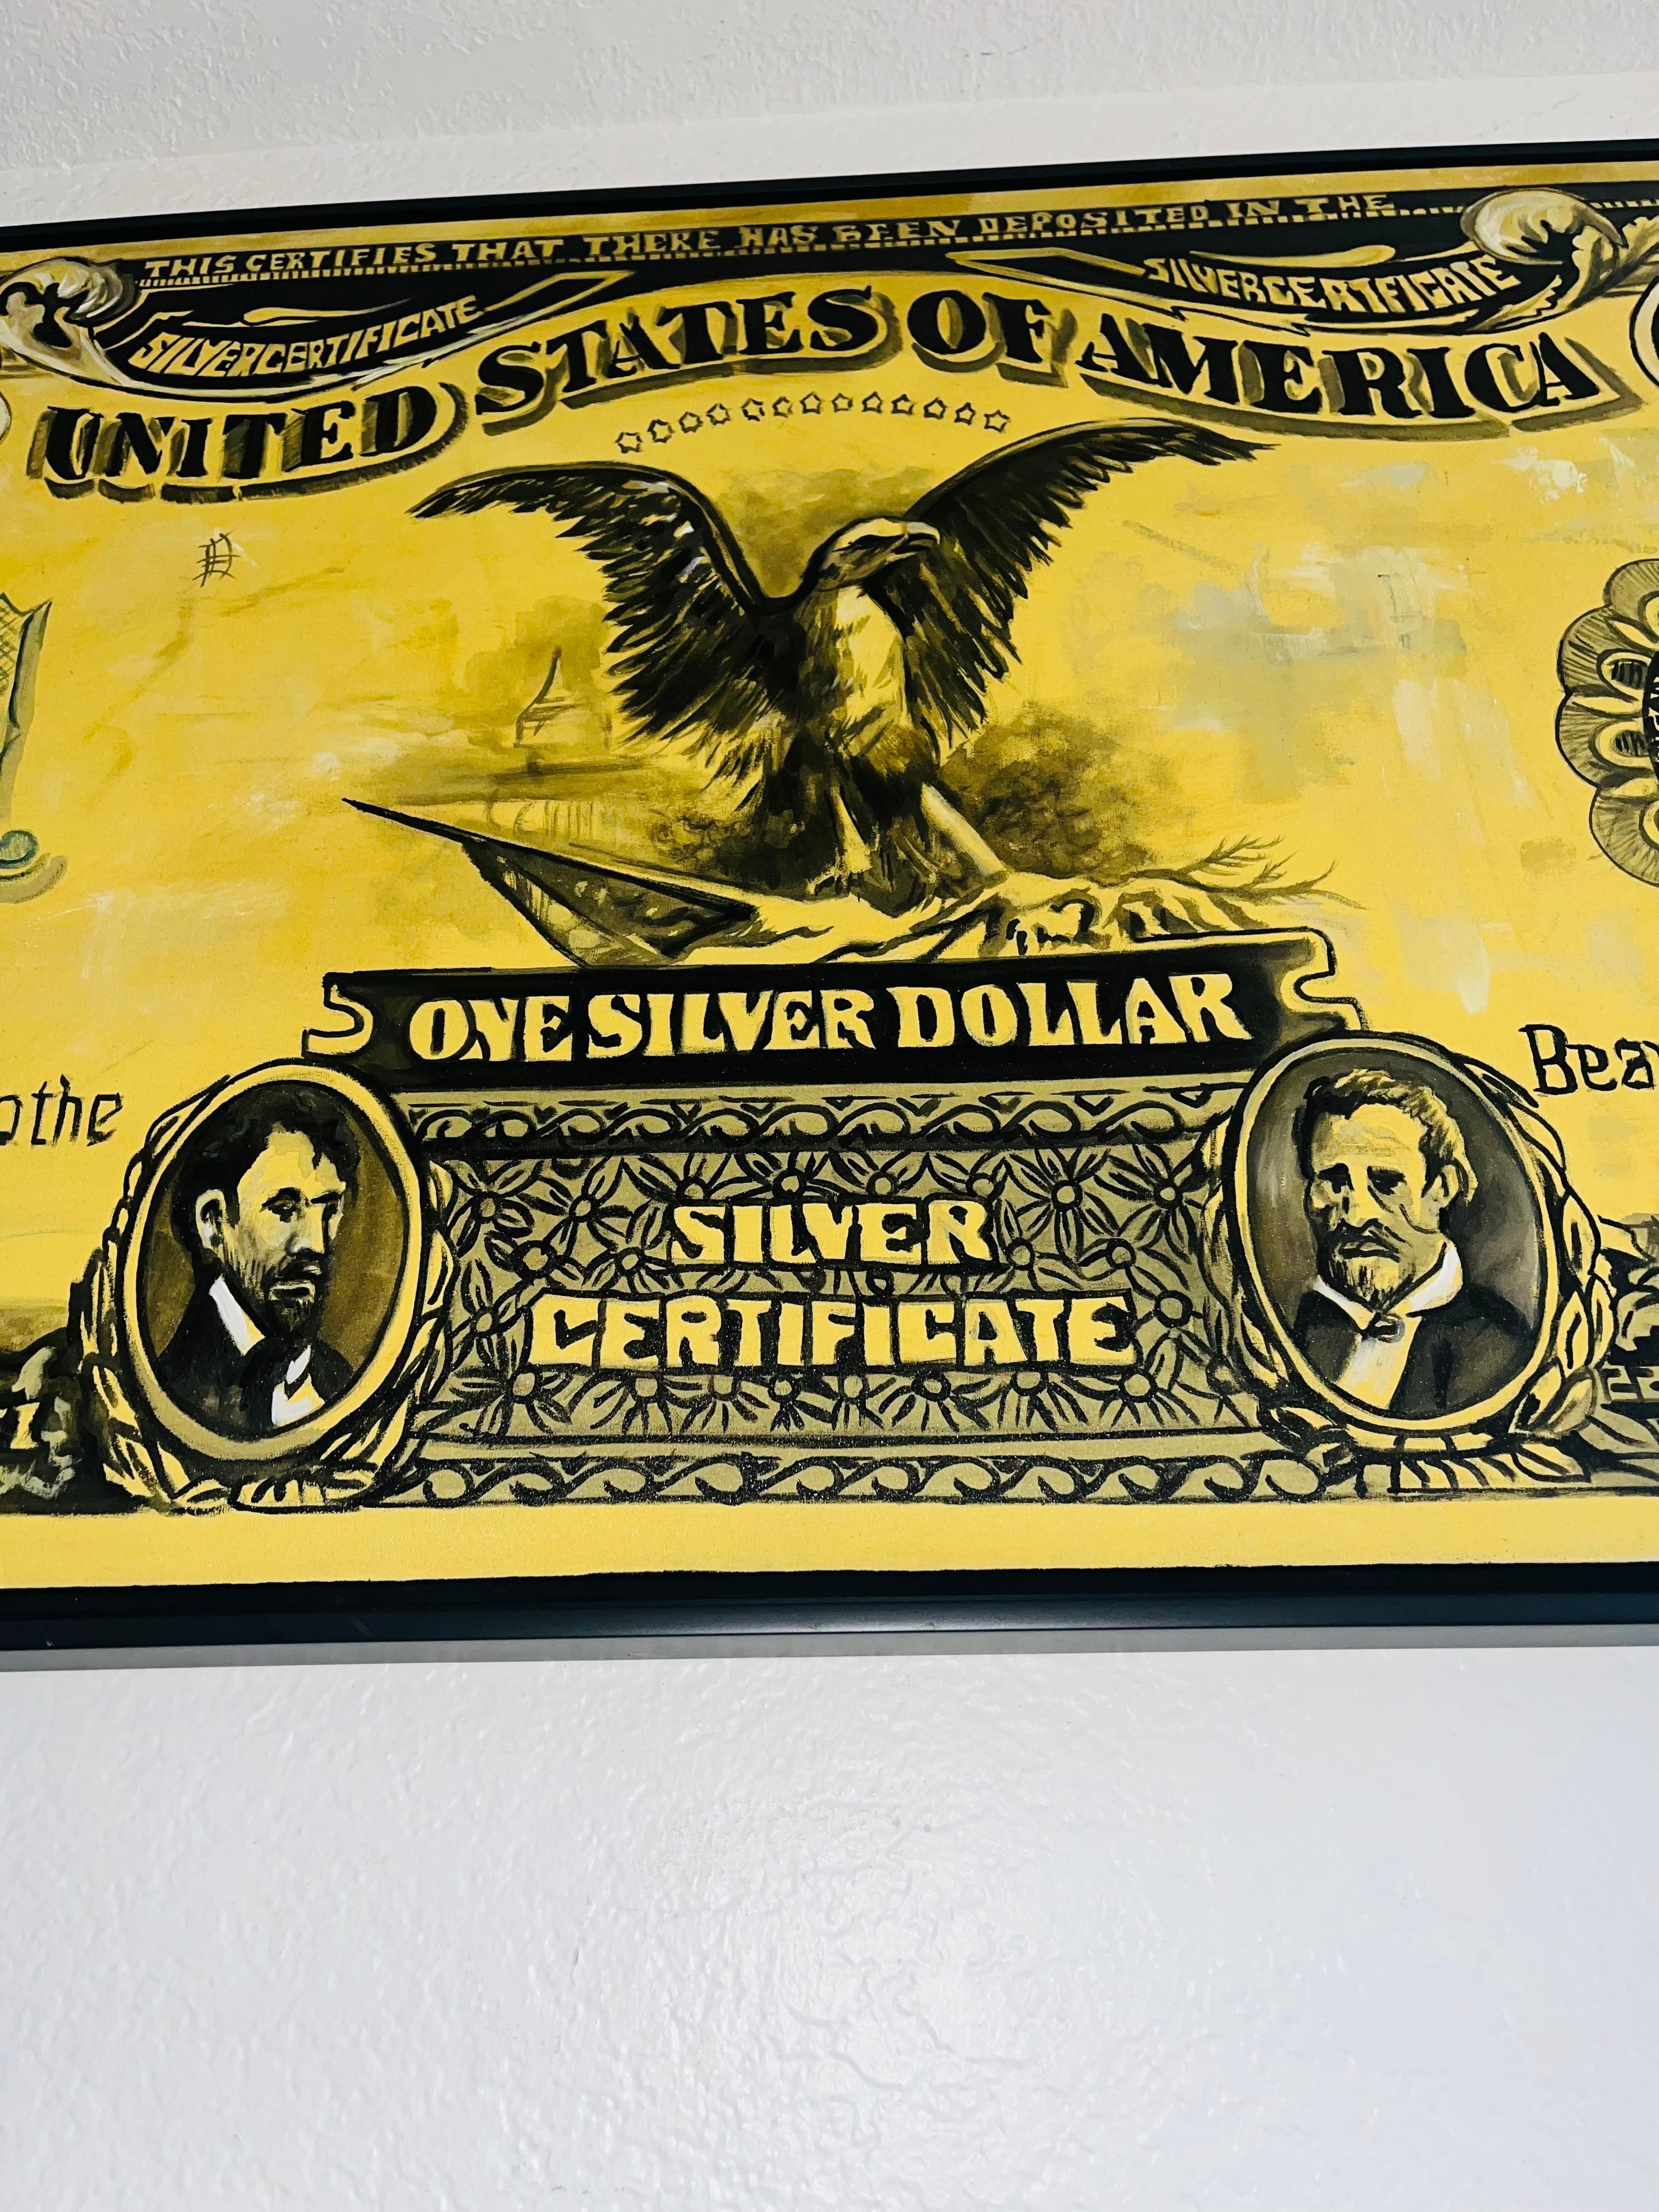               **ANNUAL SUPER SALE UNTIL JUNE 15TH ONLY**
**This Price Won't Be Repeated Again This Year - Take Advantage**

'Money Talks' is the new series of artist Mauro Oliveira.

Highly labored one of a kind pieces, celebrating the dollar